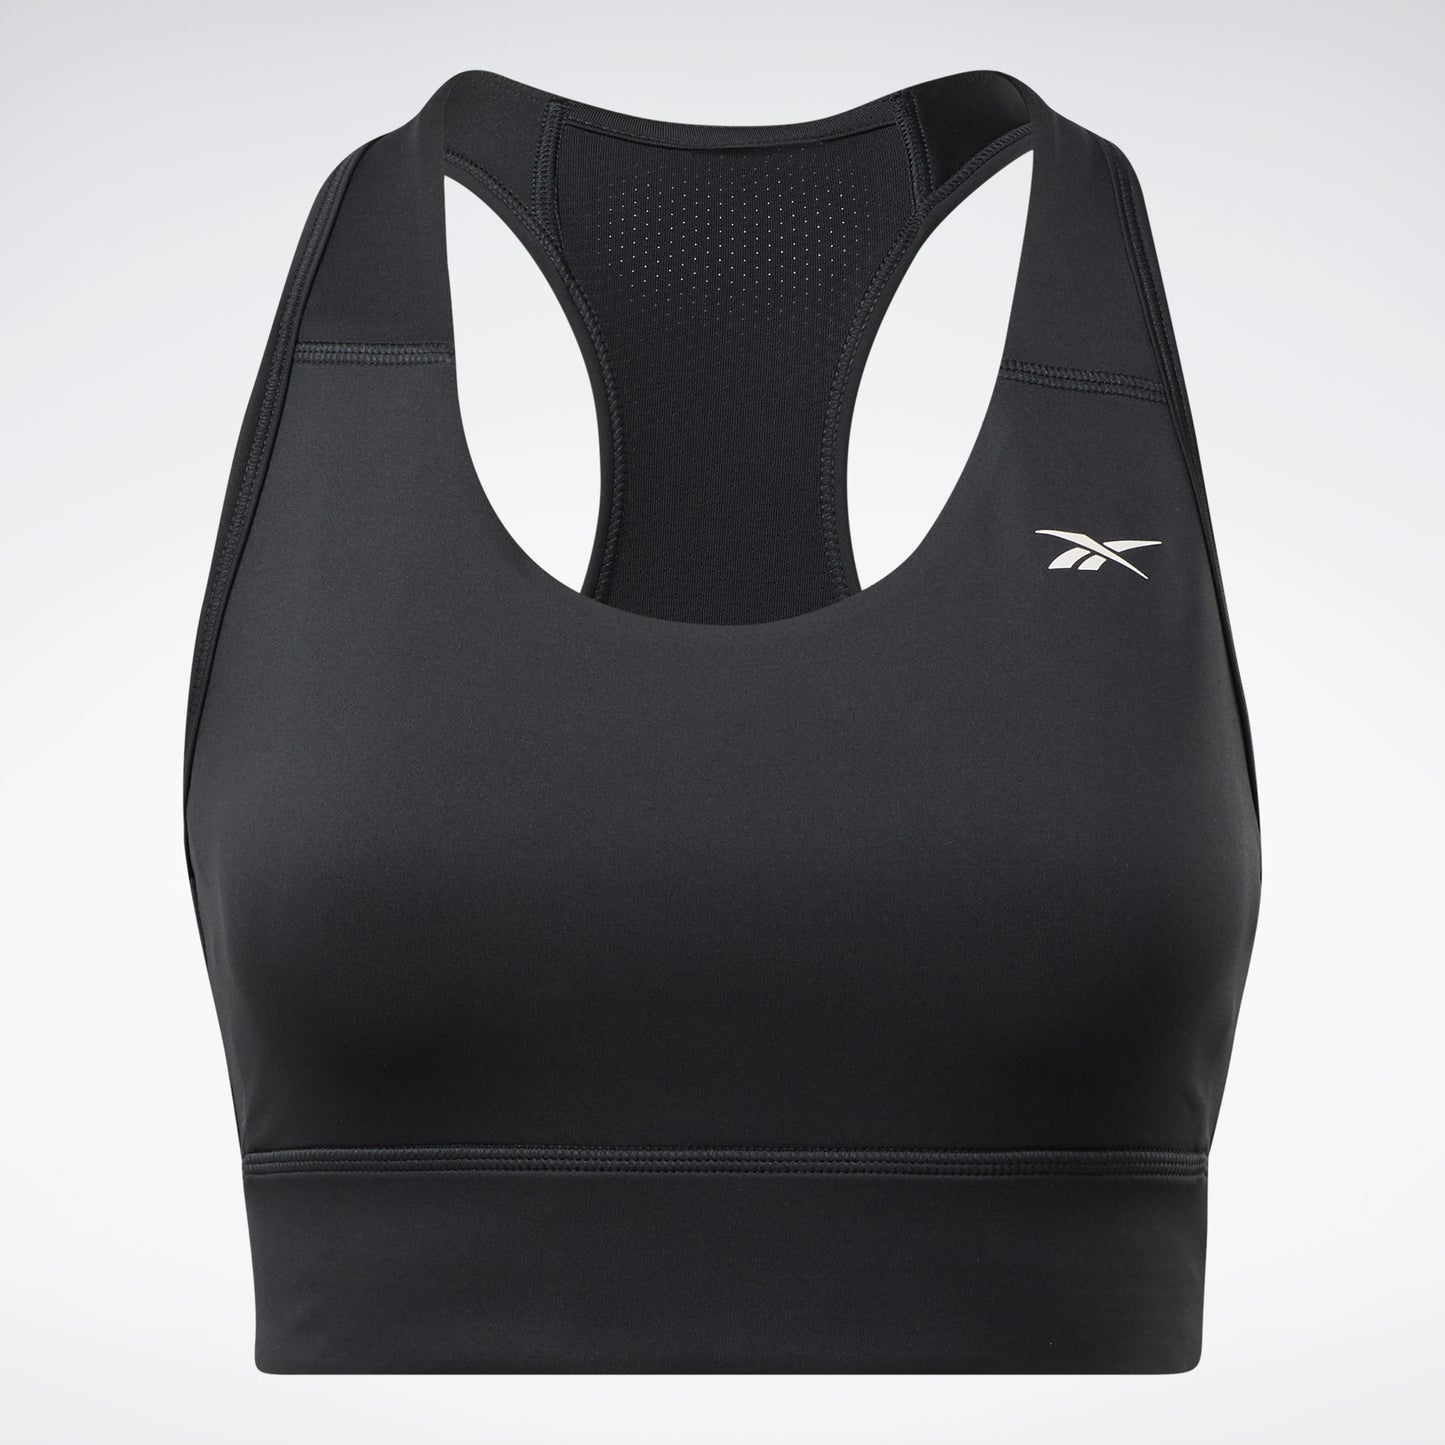 LBECLEY Extra Support Sports Bras for Women Women Full Cup Thin